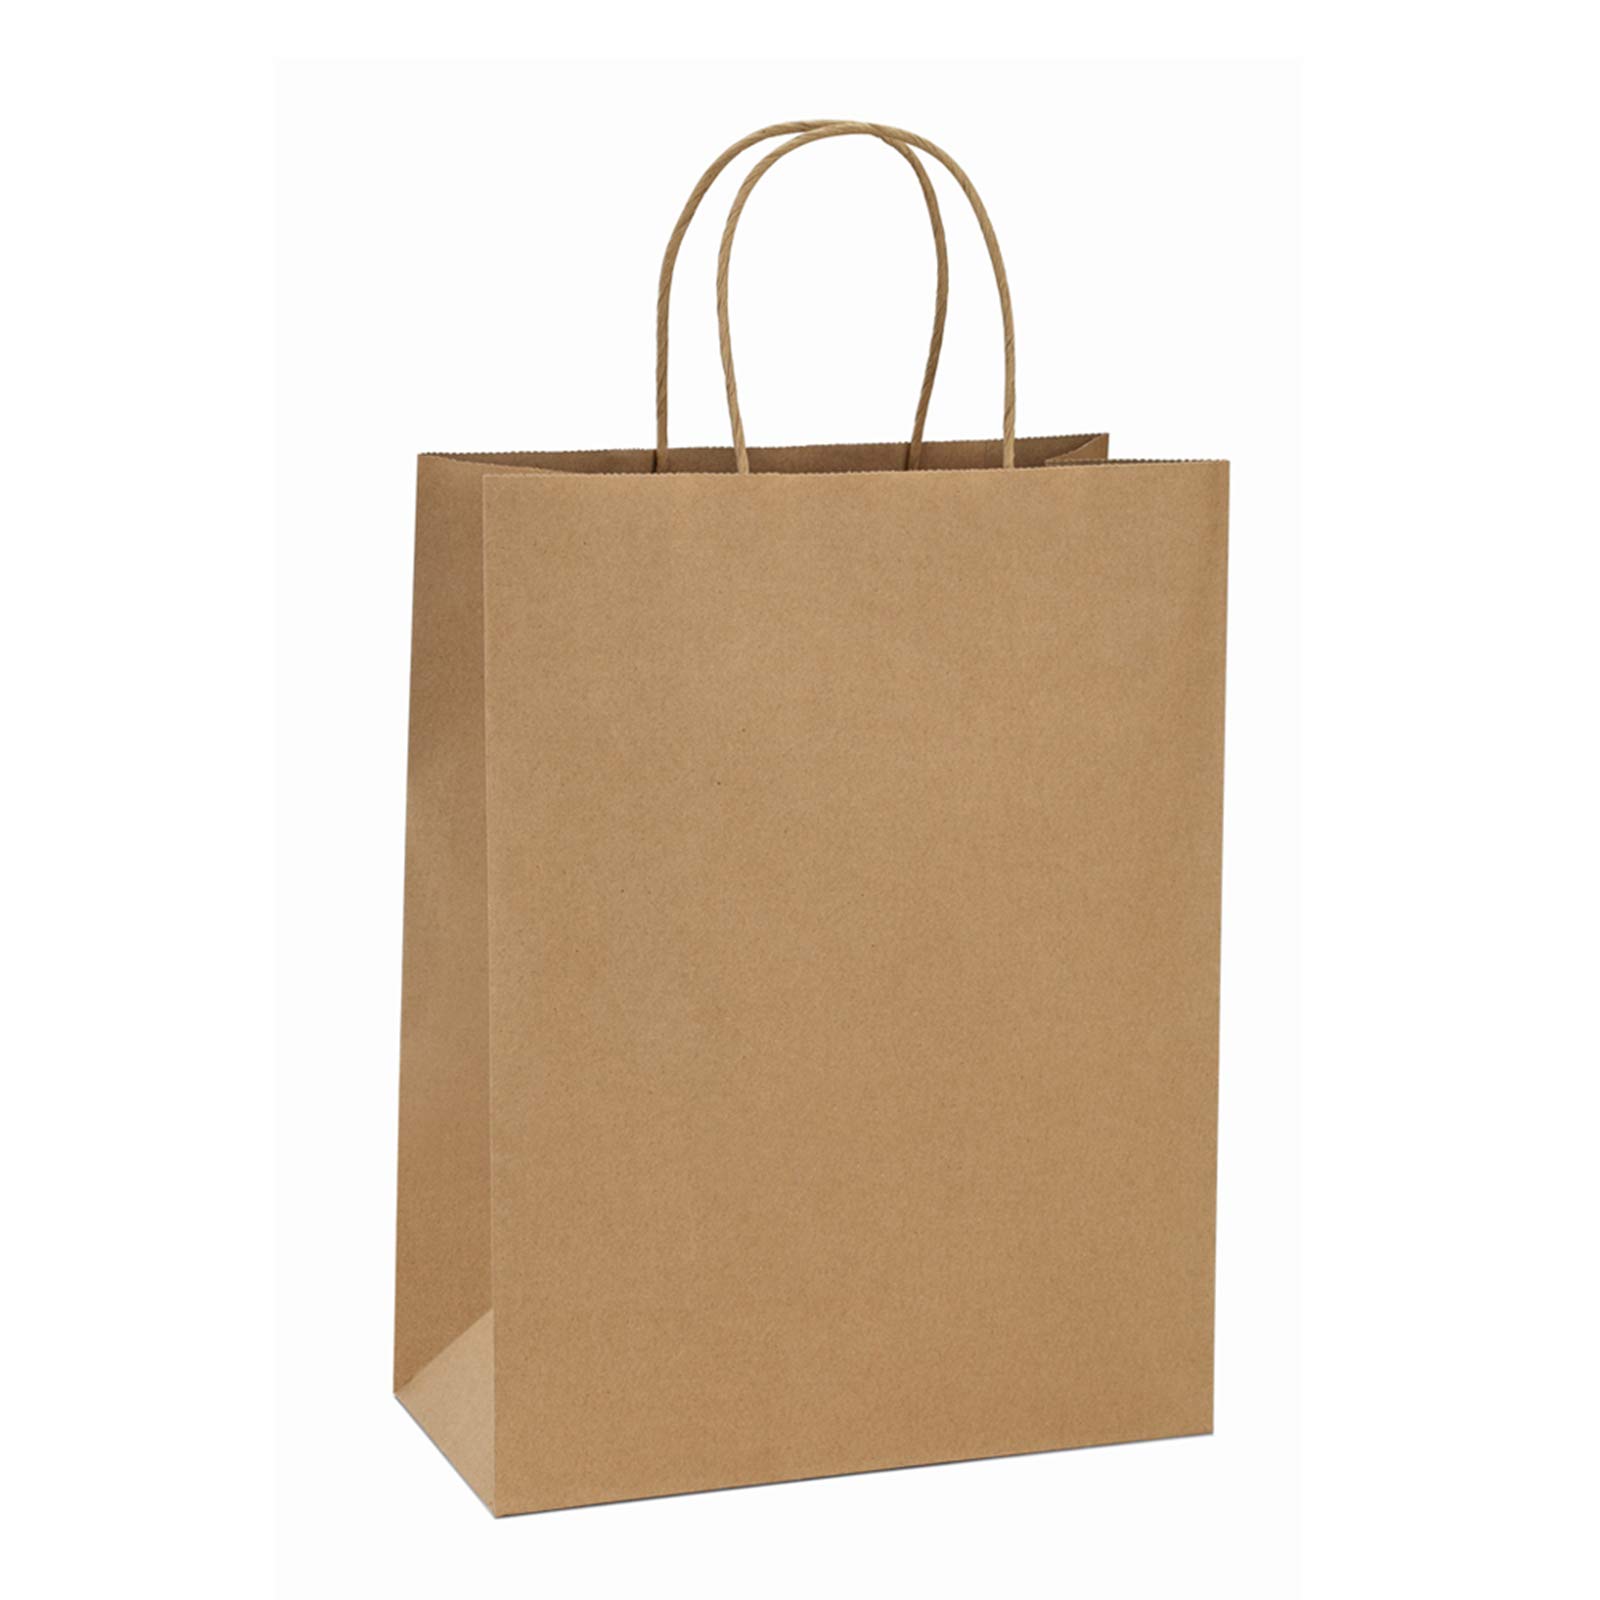 R-moment Paper Gift Bags 12 Pieces Set, Eco Friendly Paper Bags, With Handles  Bulk, Paper Bags, Shopping Bags, Kraft Bags, Retail Bags, Party Bags  15X21X8Cm, Color Dark Blue, PSB2951DB price in UAE |